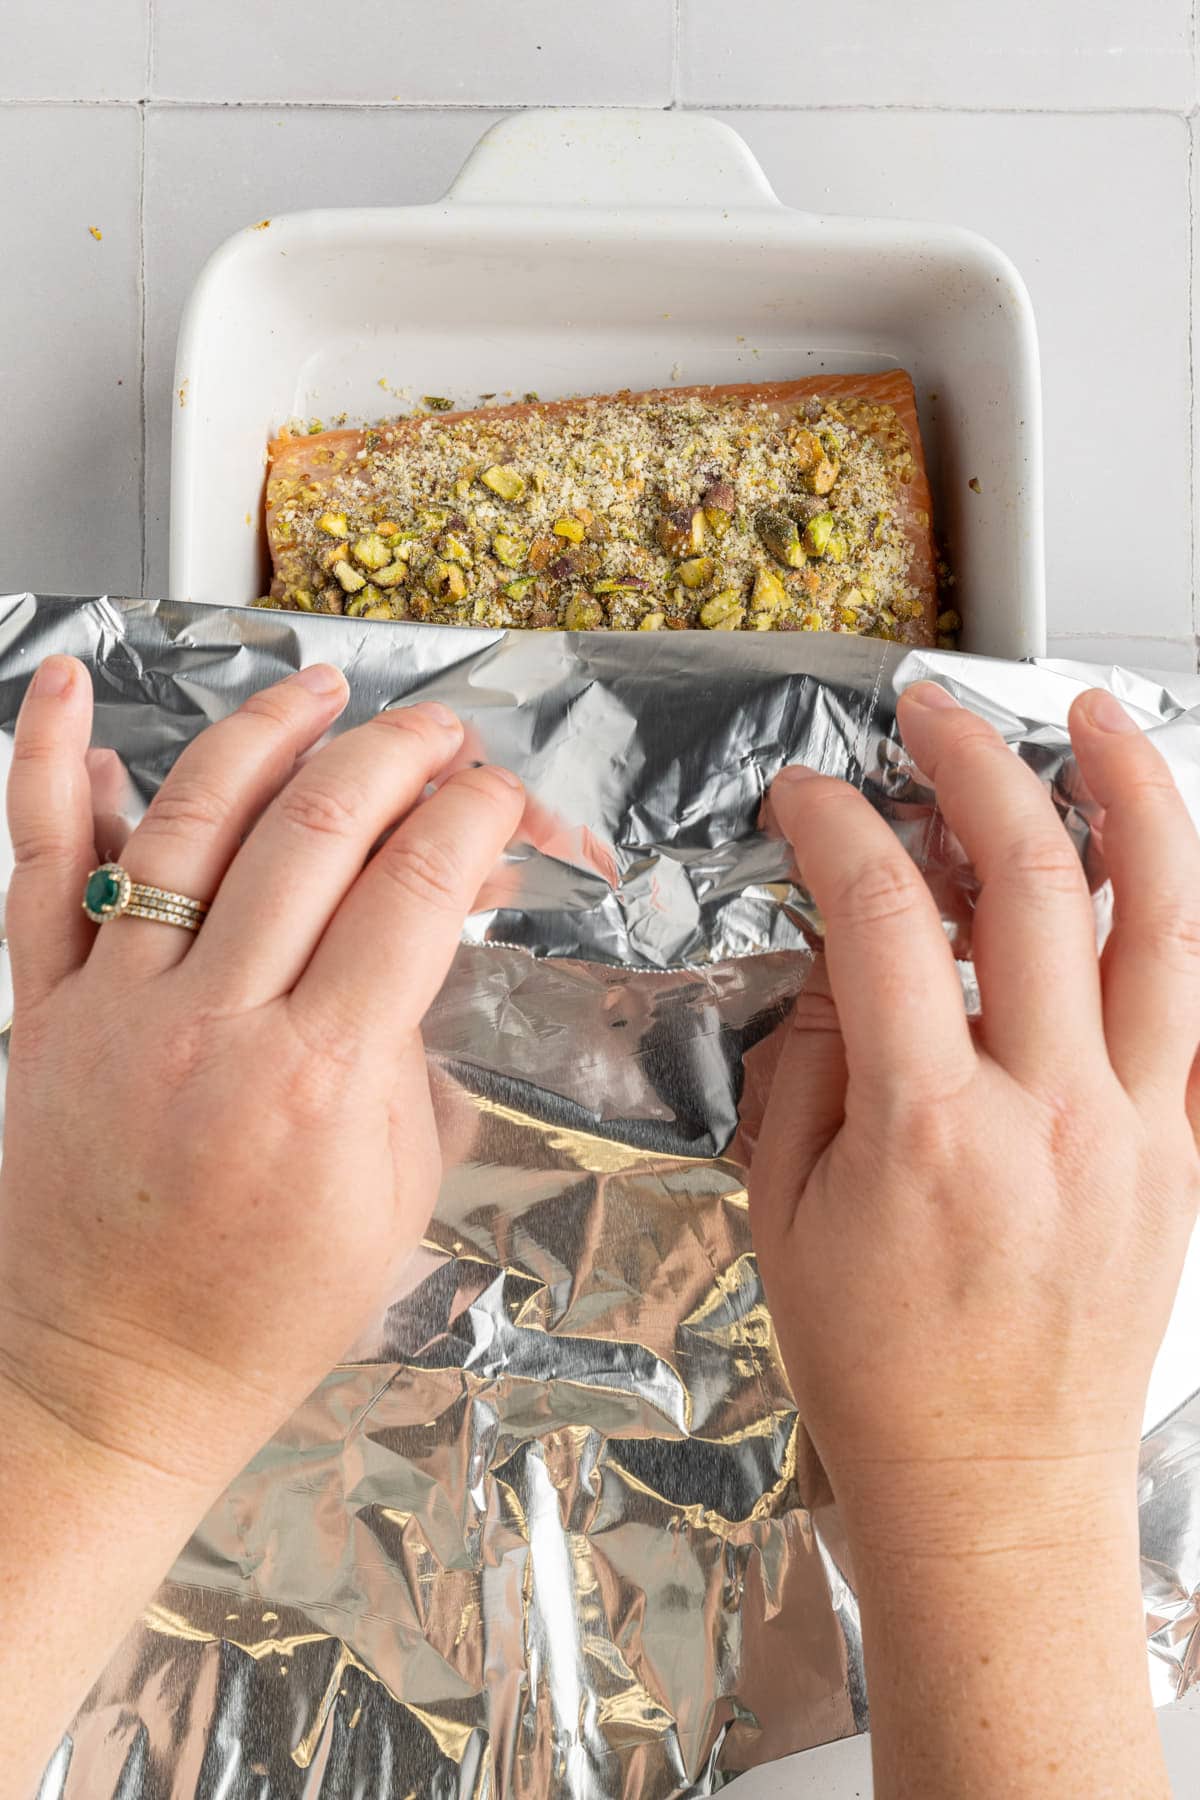 Covering salmon crusted with pistachios with aluminum foil to bake